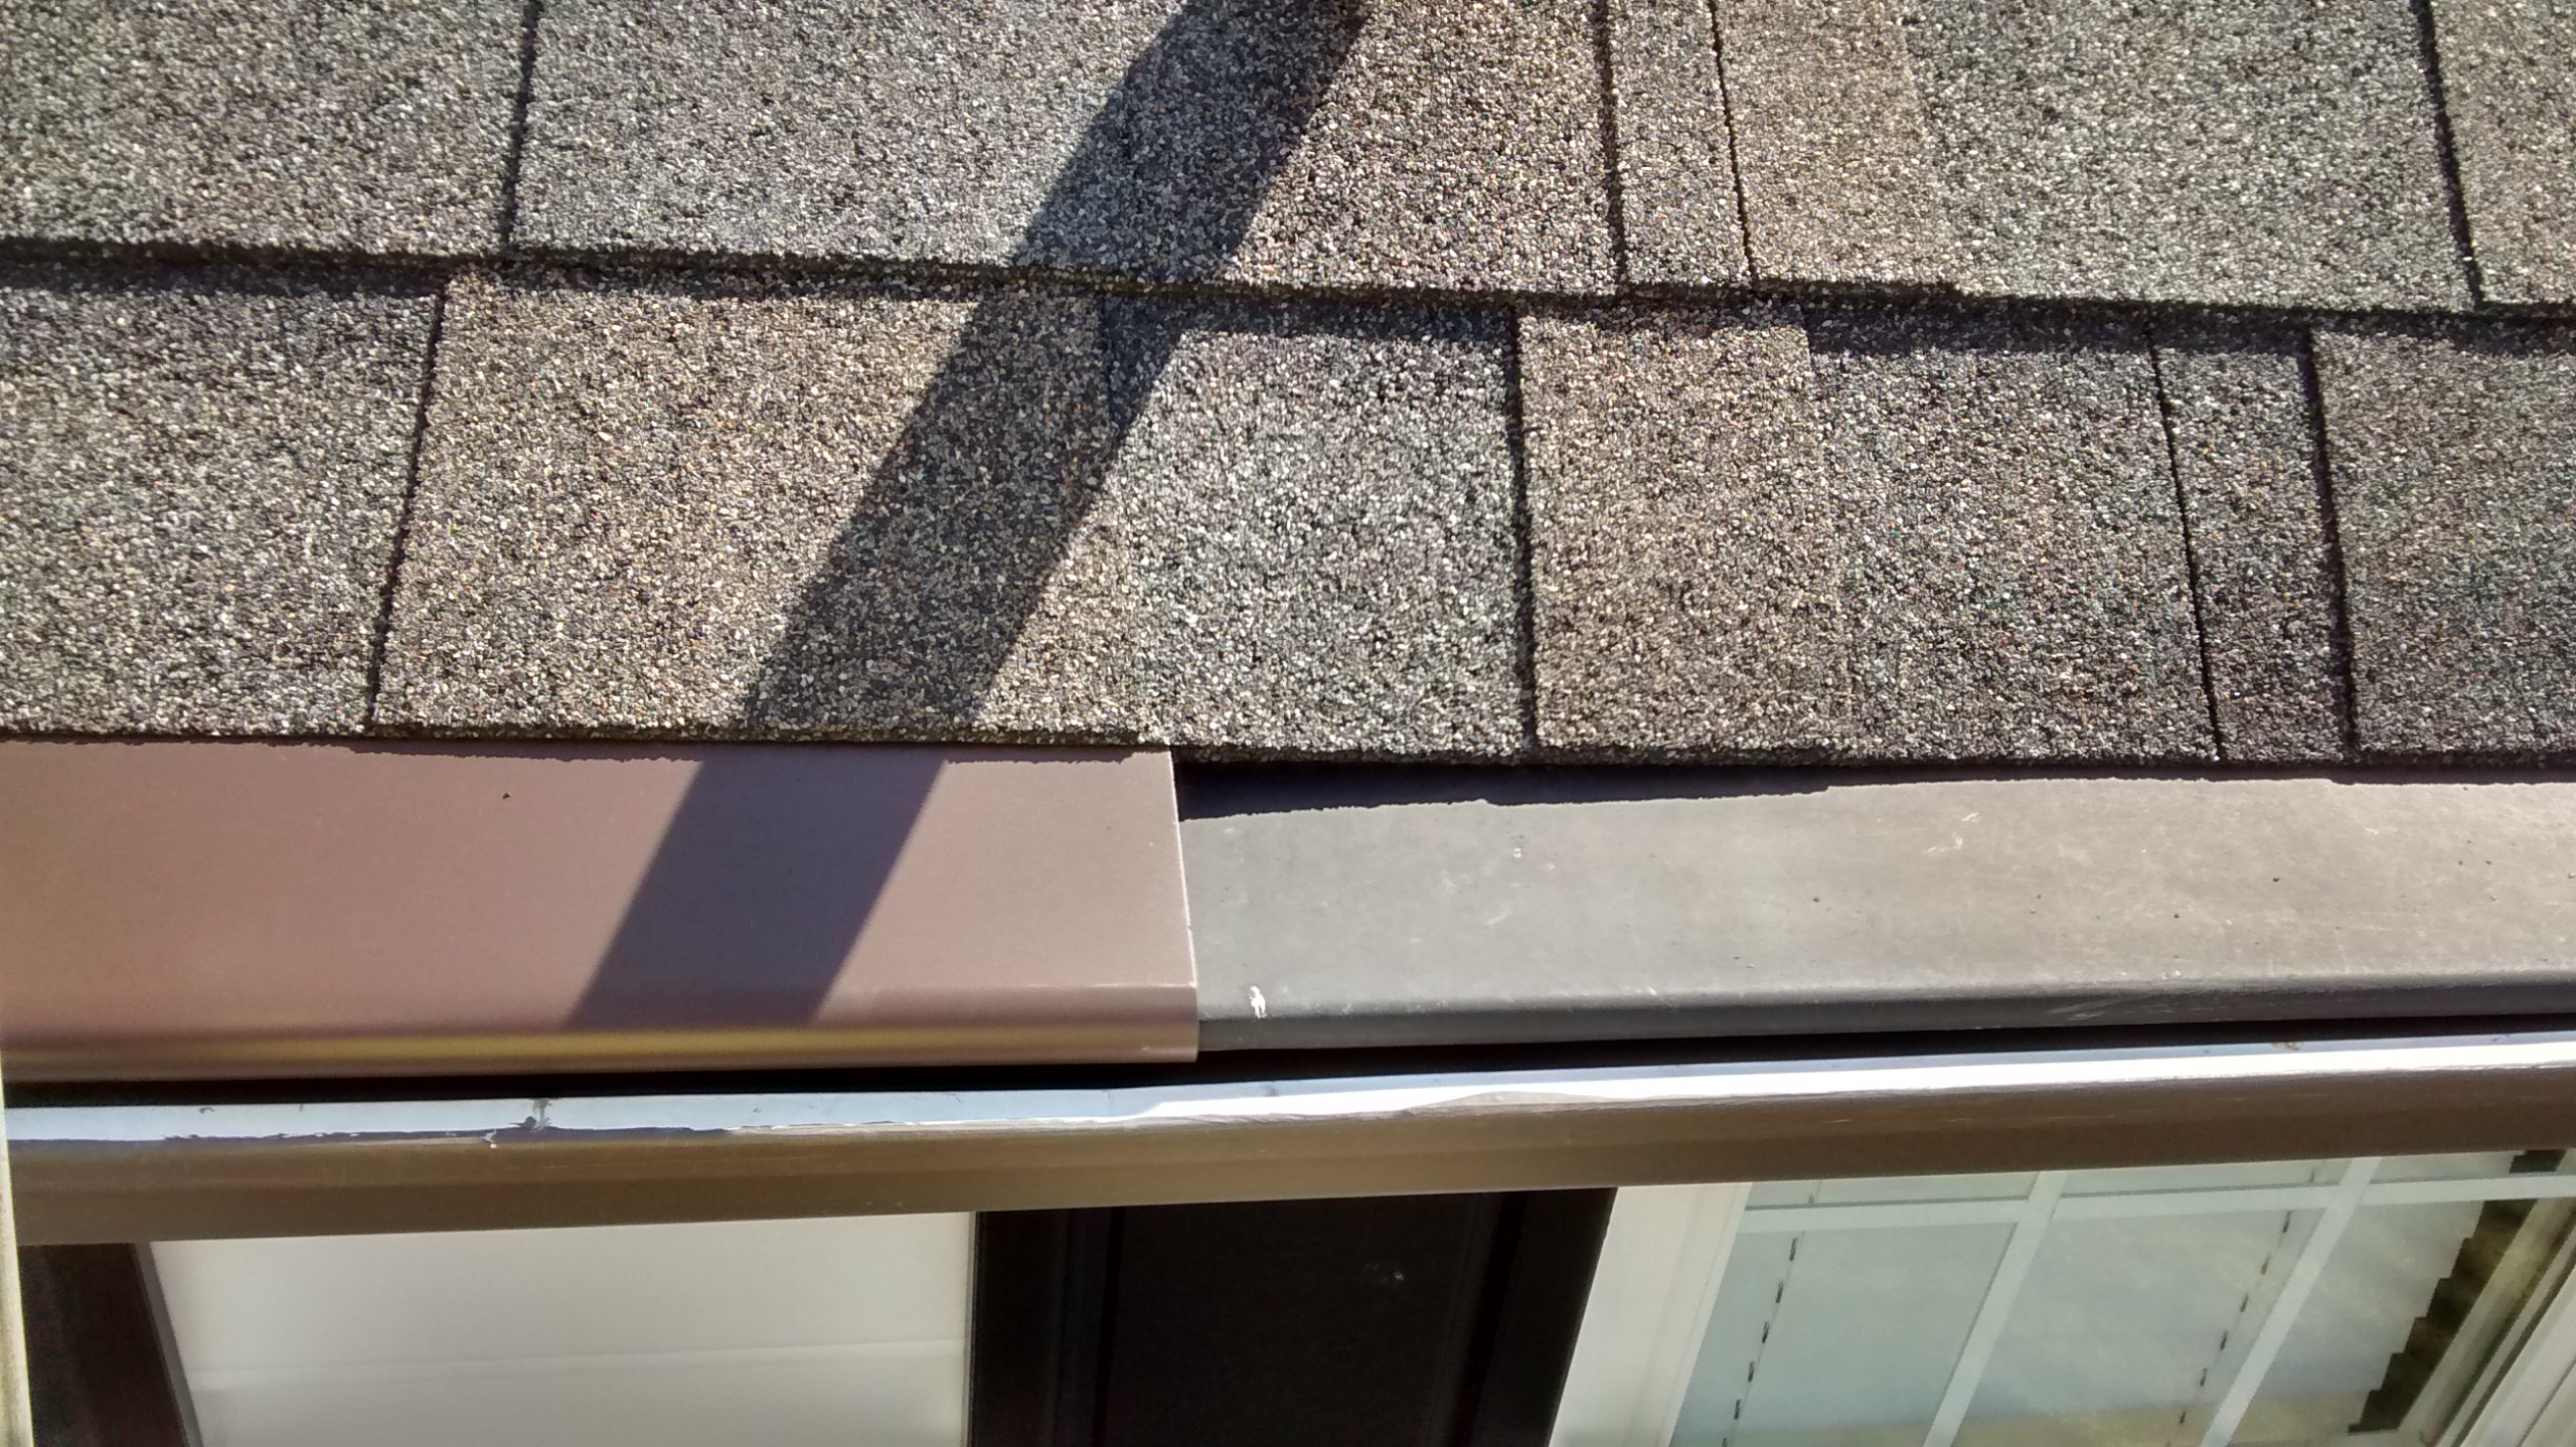 The #1 rated gutter guard in Hillsborough NC | LeavesOut